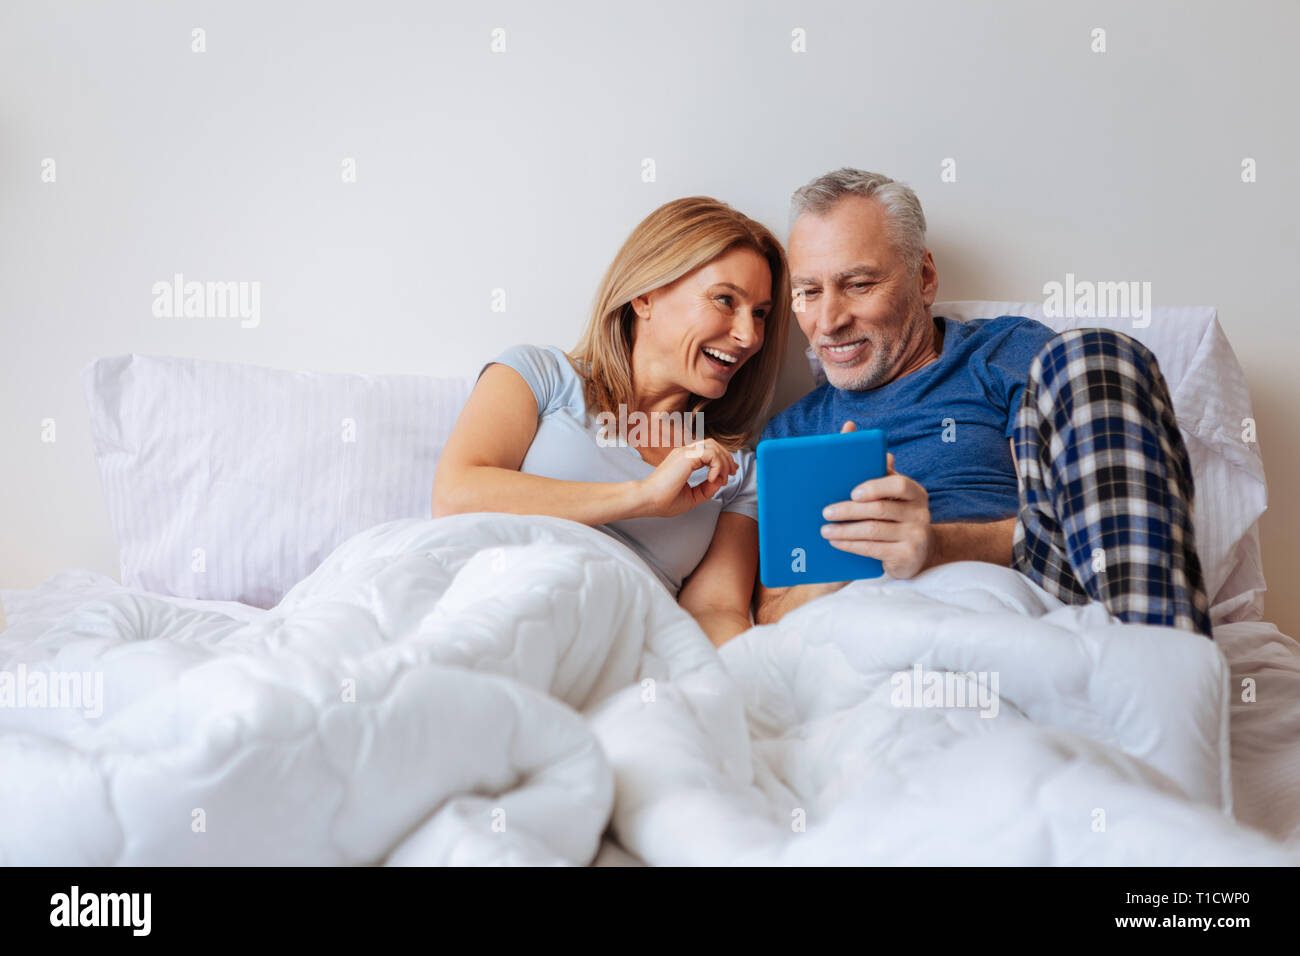 Wife feeling entertained while watching comedy with husband Stock Photo